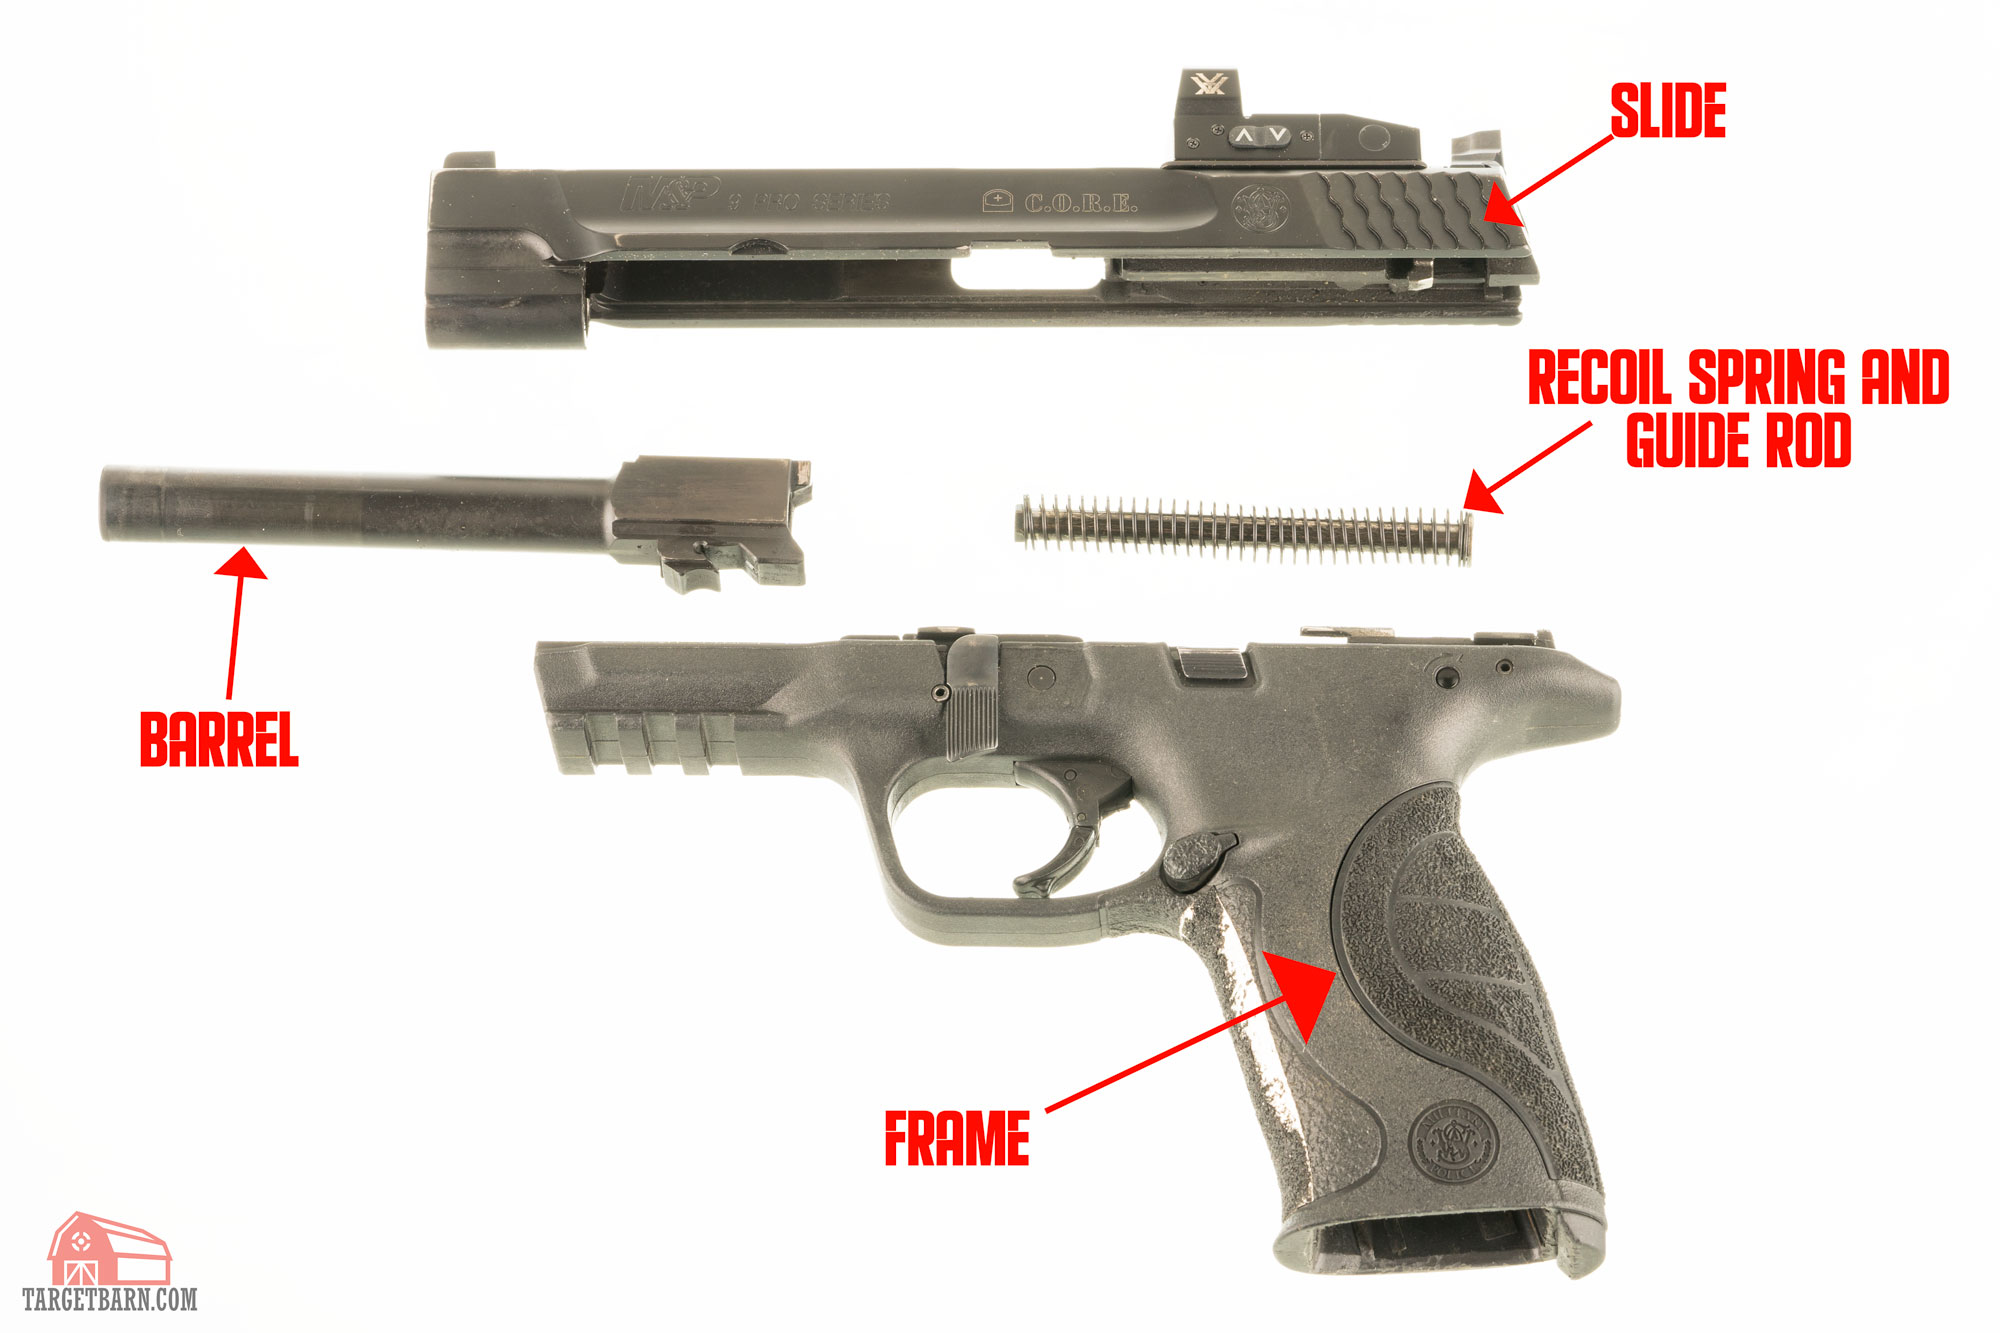 a diagram hsowing the barrel, slide, recoil spring, guide rod, and frame of a handgun